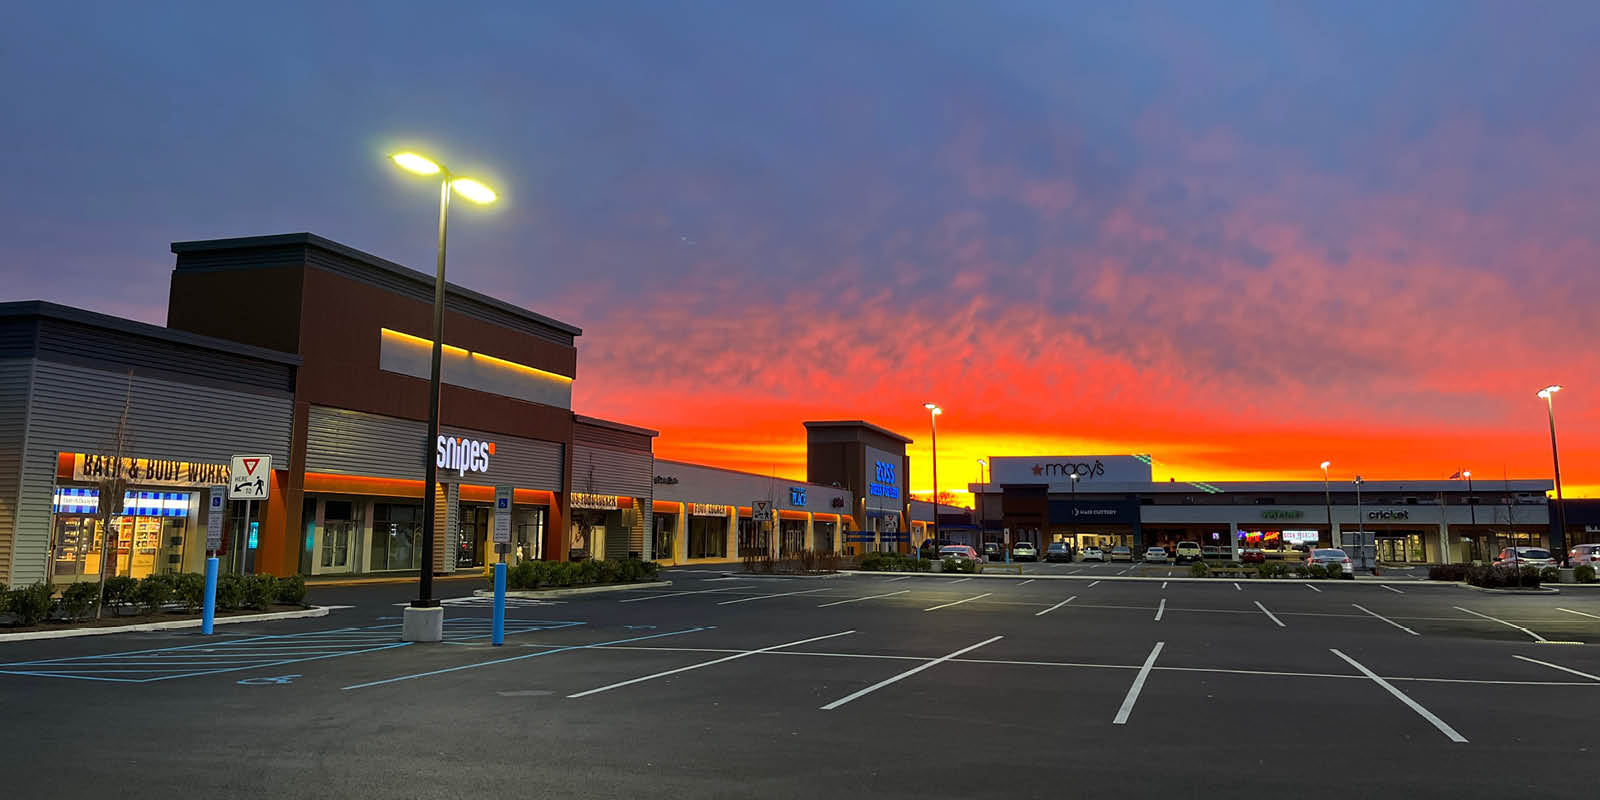 Exterior facade of strip mall with sunrise behind buildings